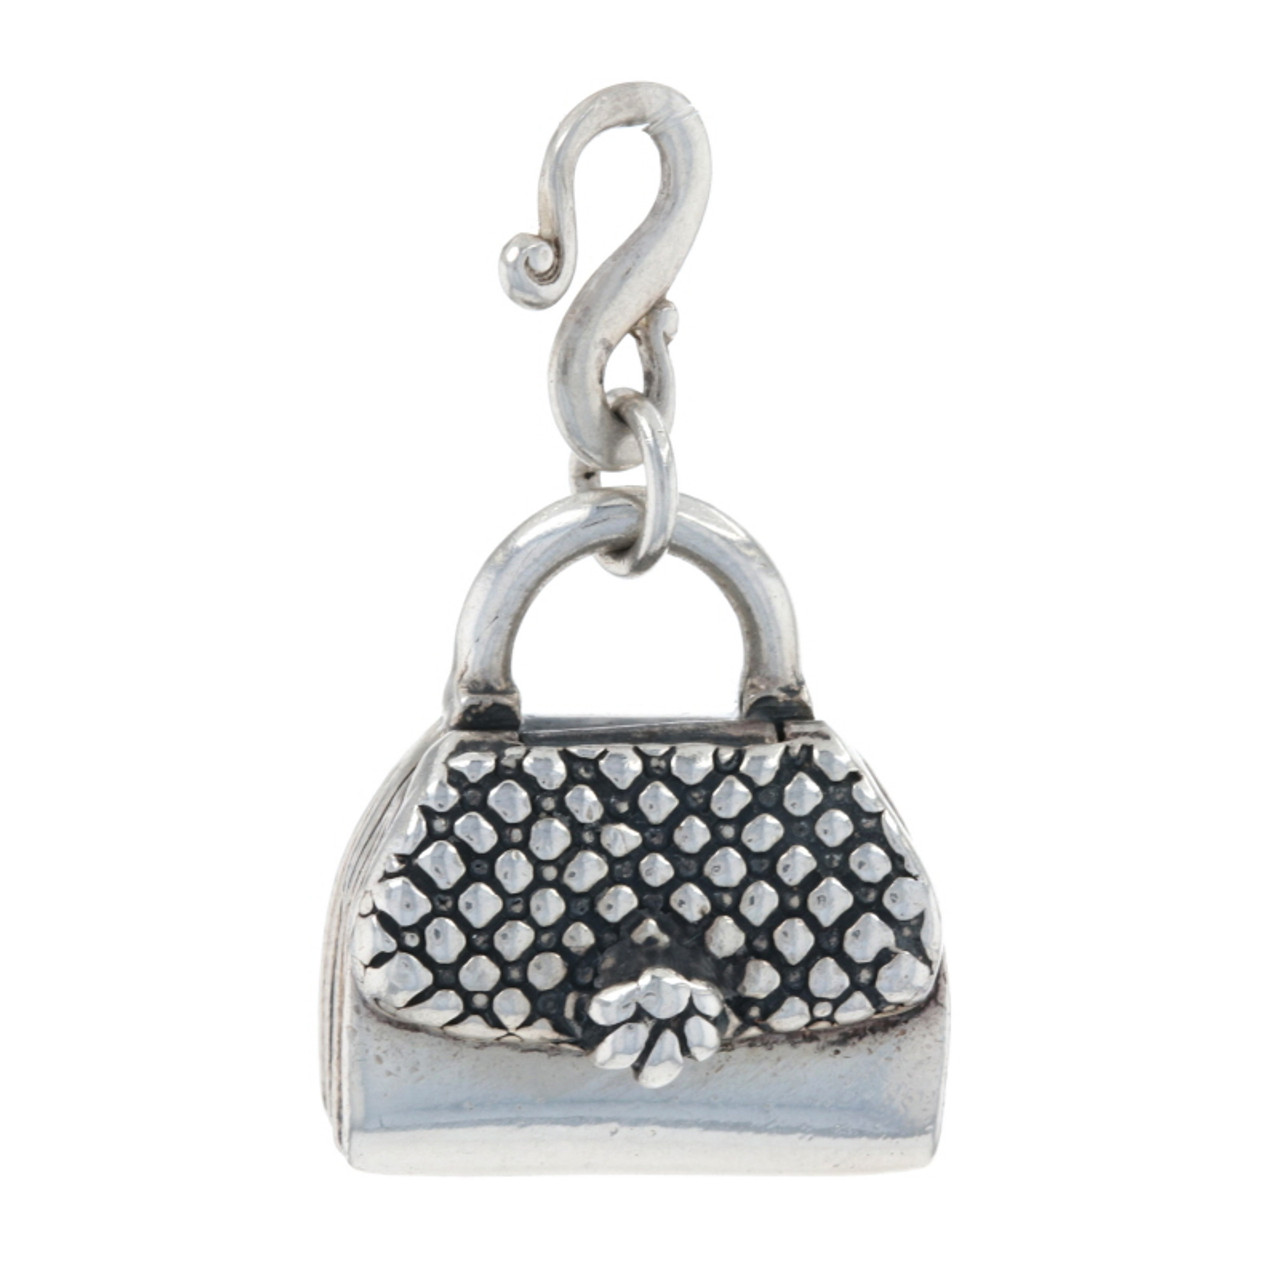 CHARMS by New Vintage Handbags